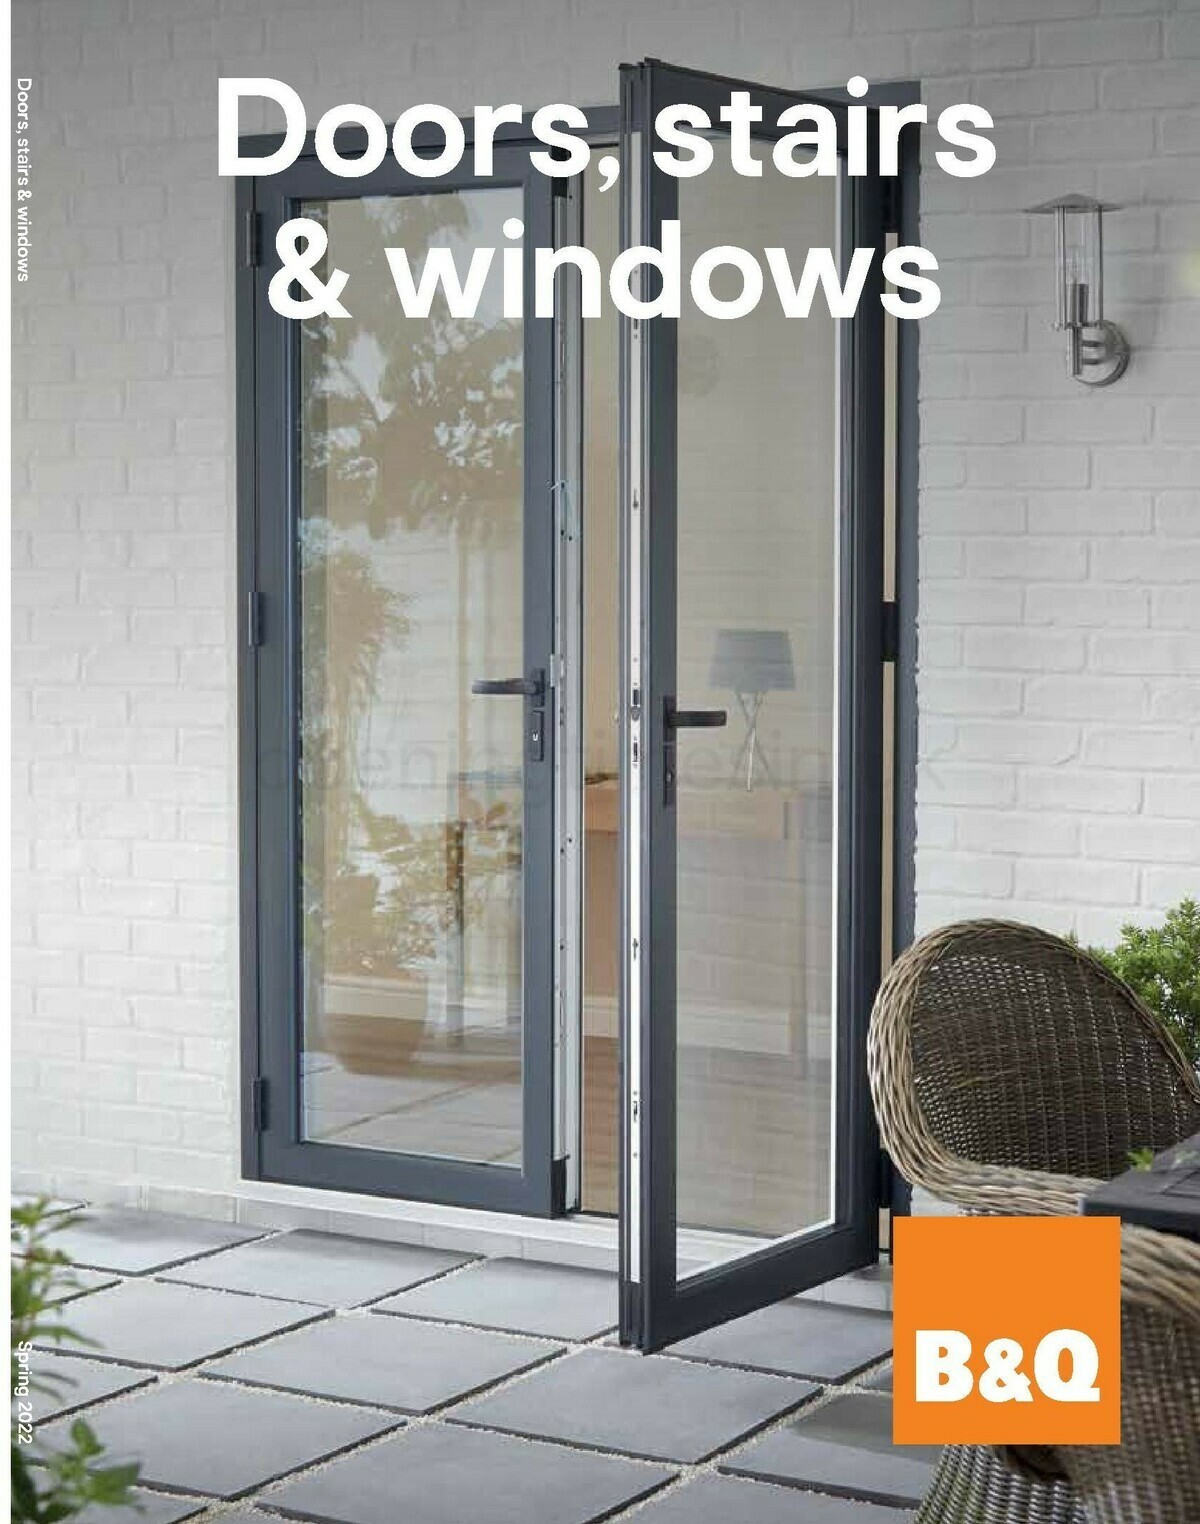 B&Q Doors, stairs & windows Offers from 15 April